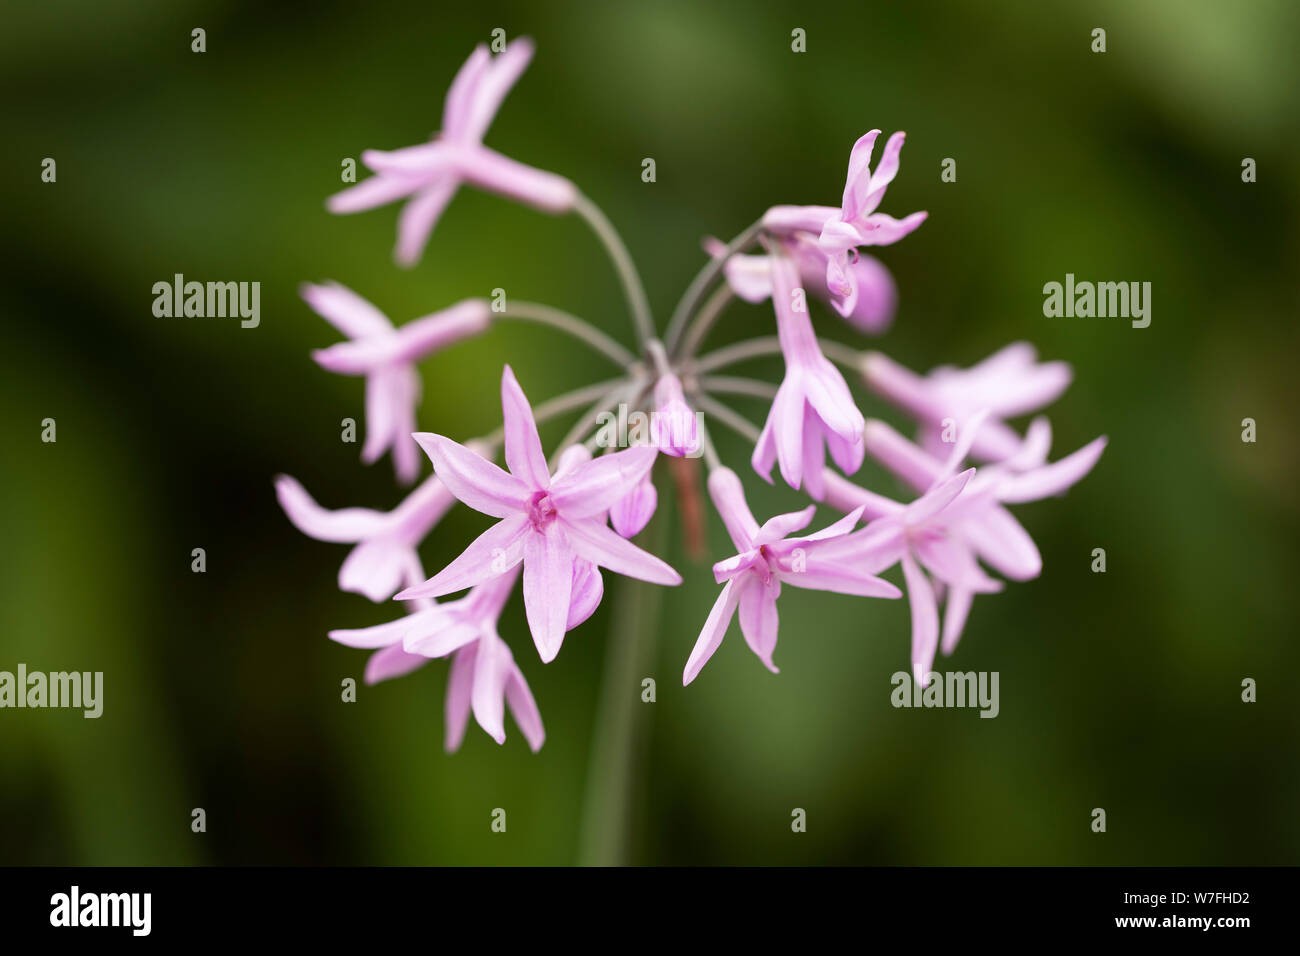 Tulbaghia violacea, known as society garlic, pink agapanthus, wild garlic, sweet garlic, spring bulbs, or spring flowers, native to southern Africa. Stock Photo